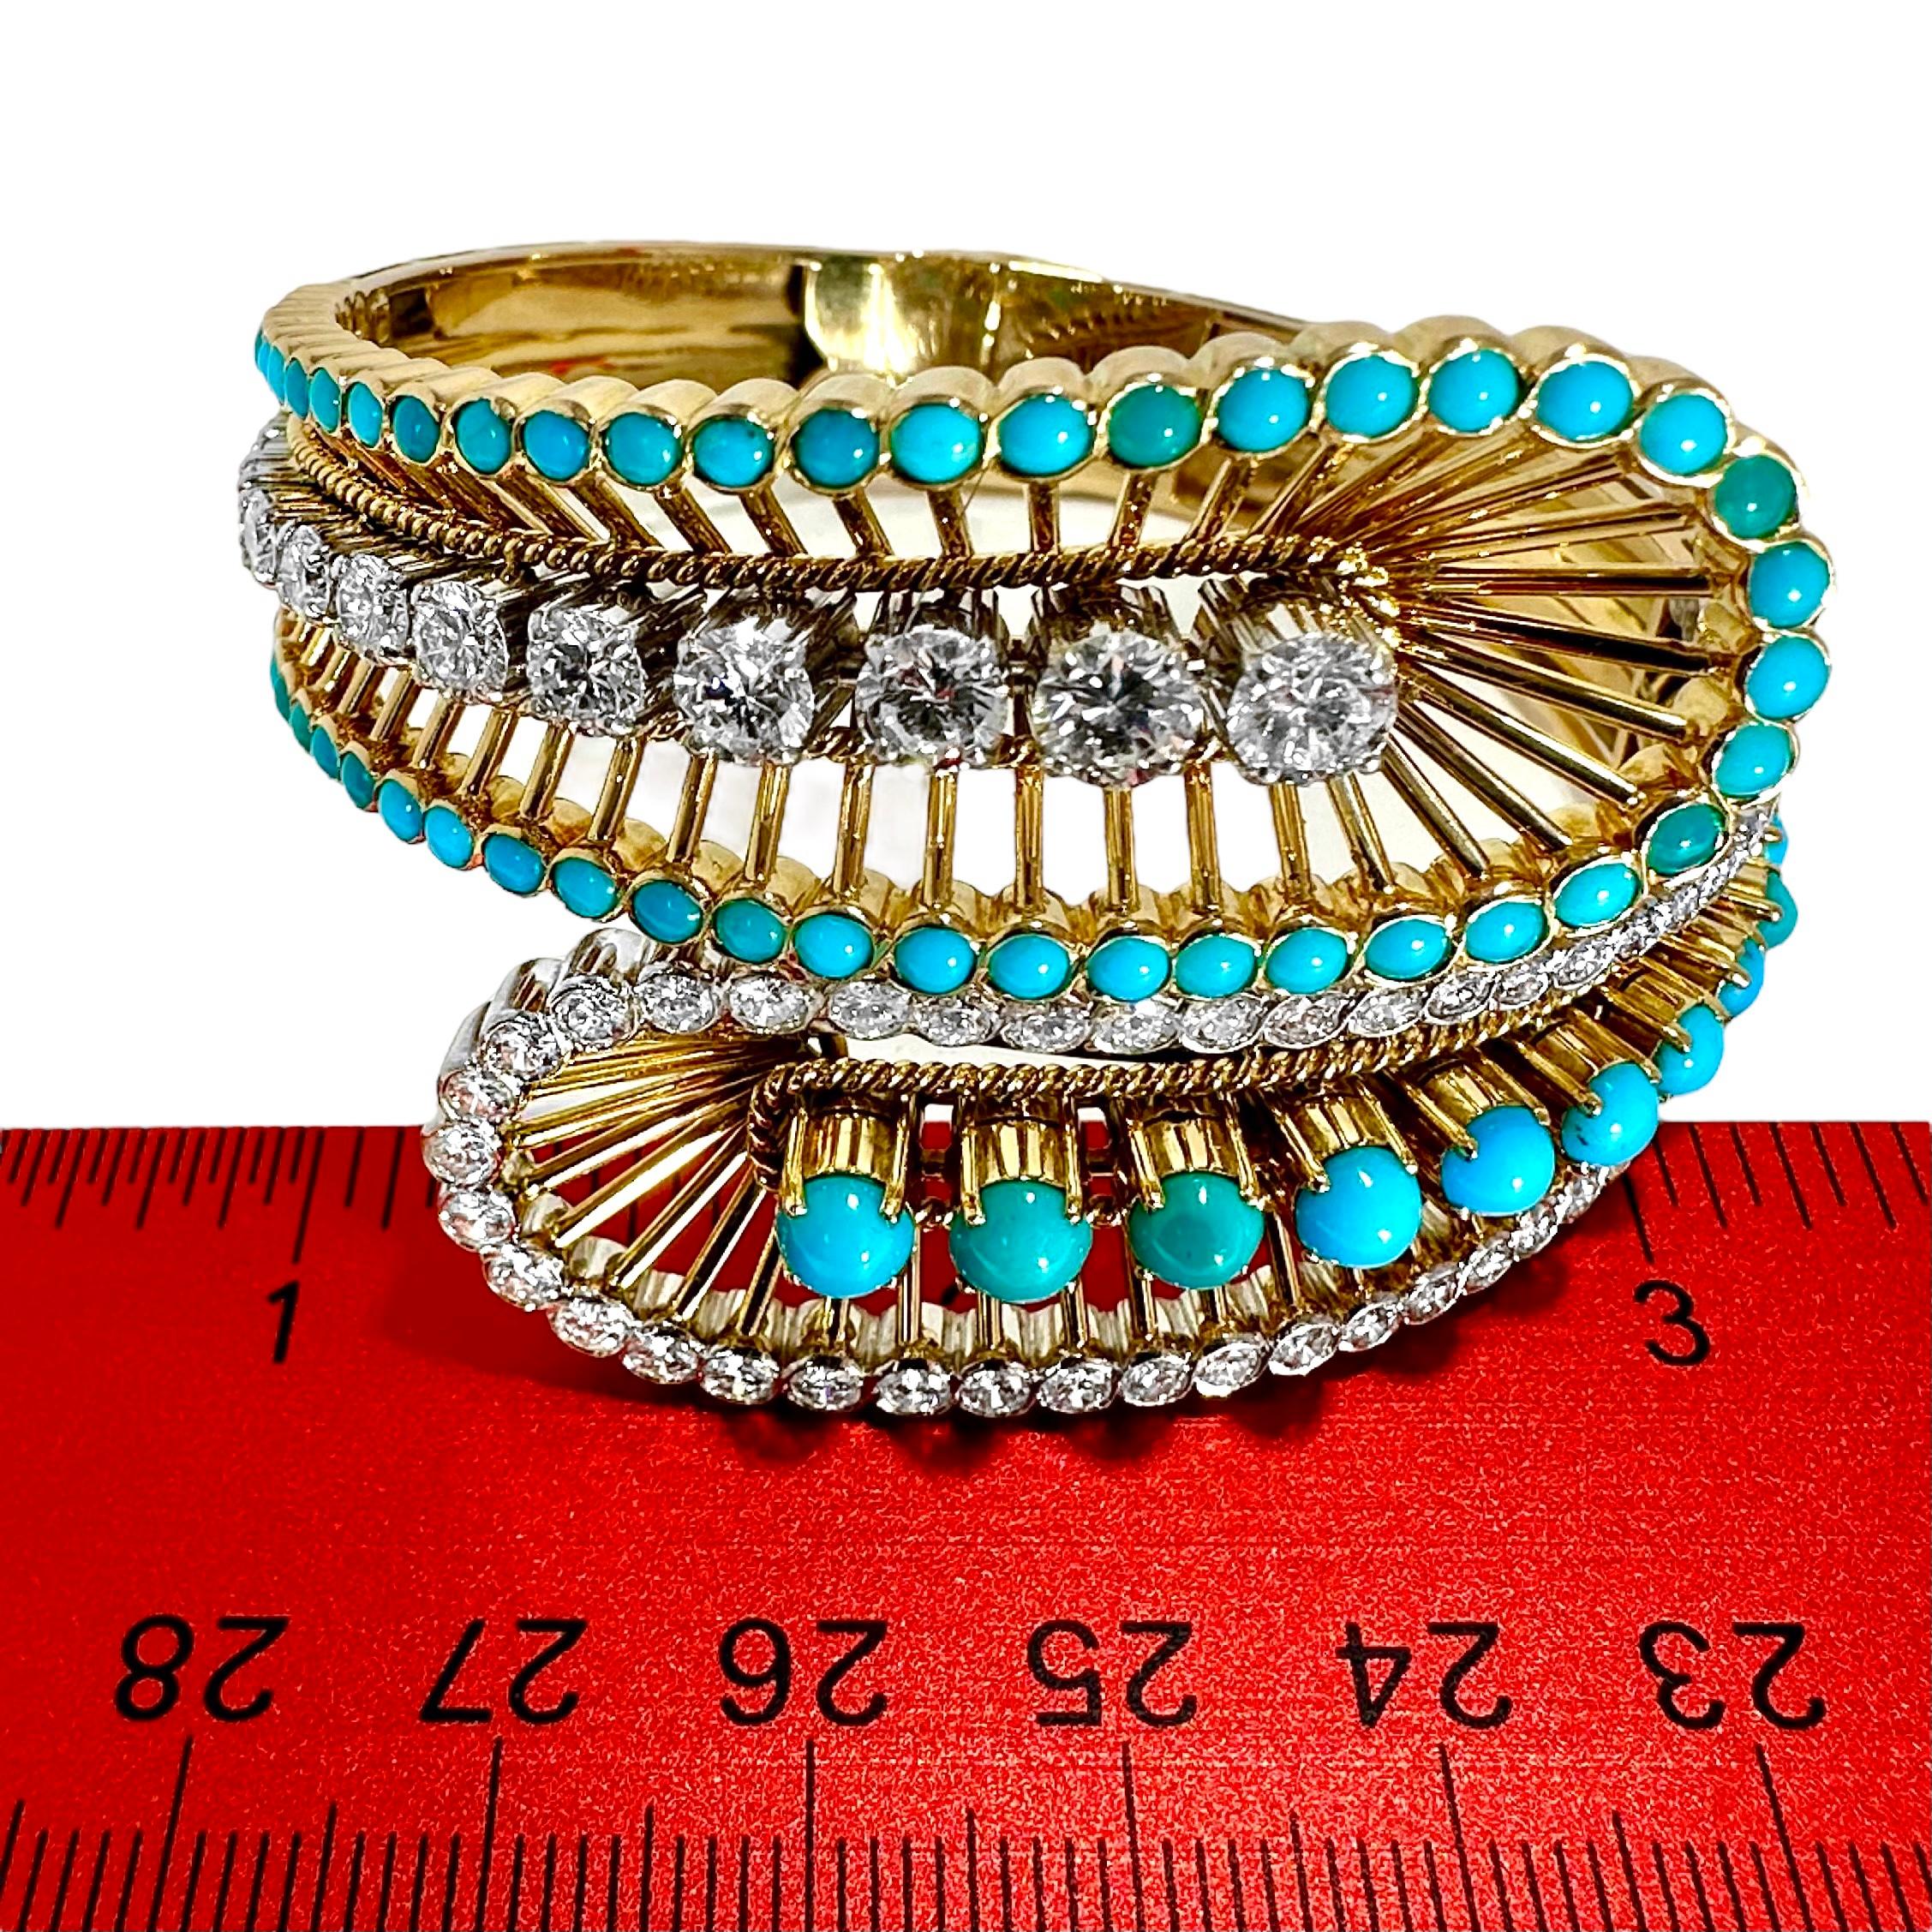 Elegant Wide Bypass Cuff in Gold, Turquoise & Diamonds by Greek Maker VOURAKIS  3